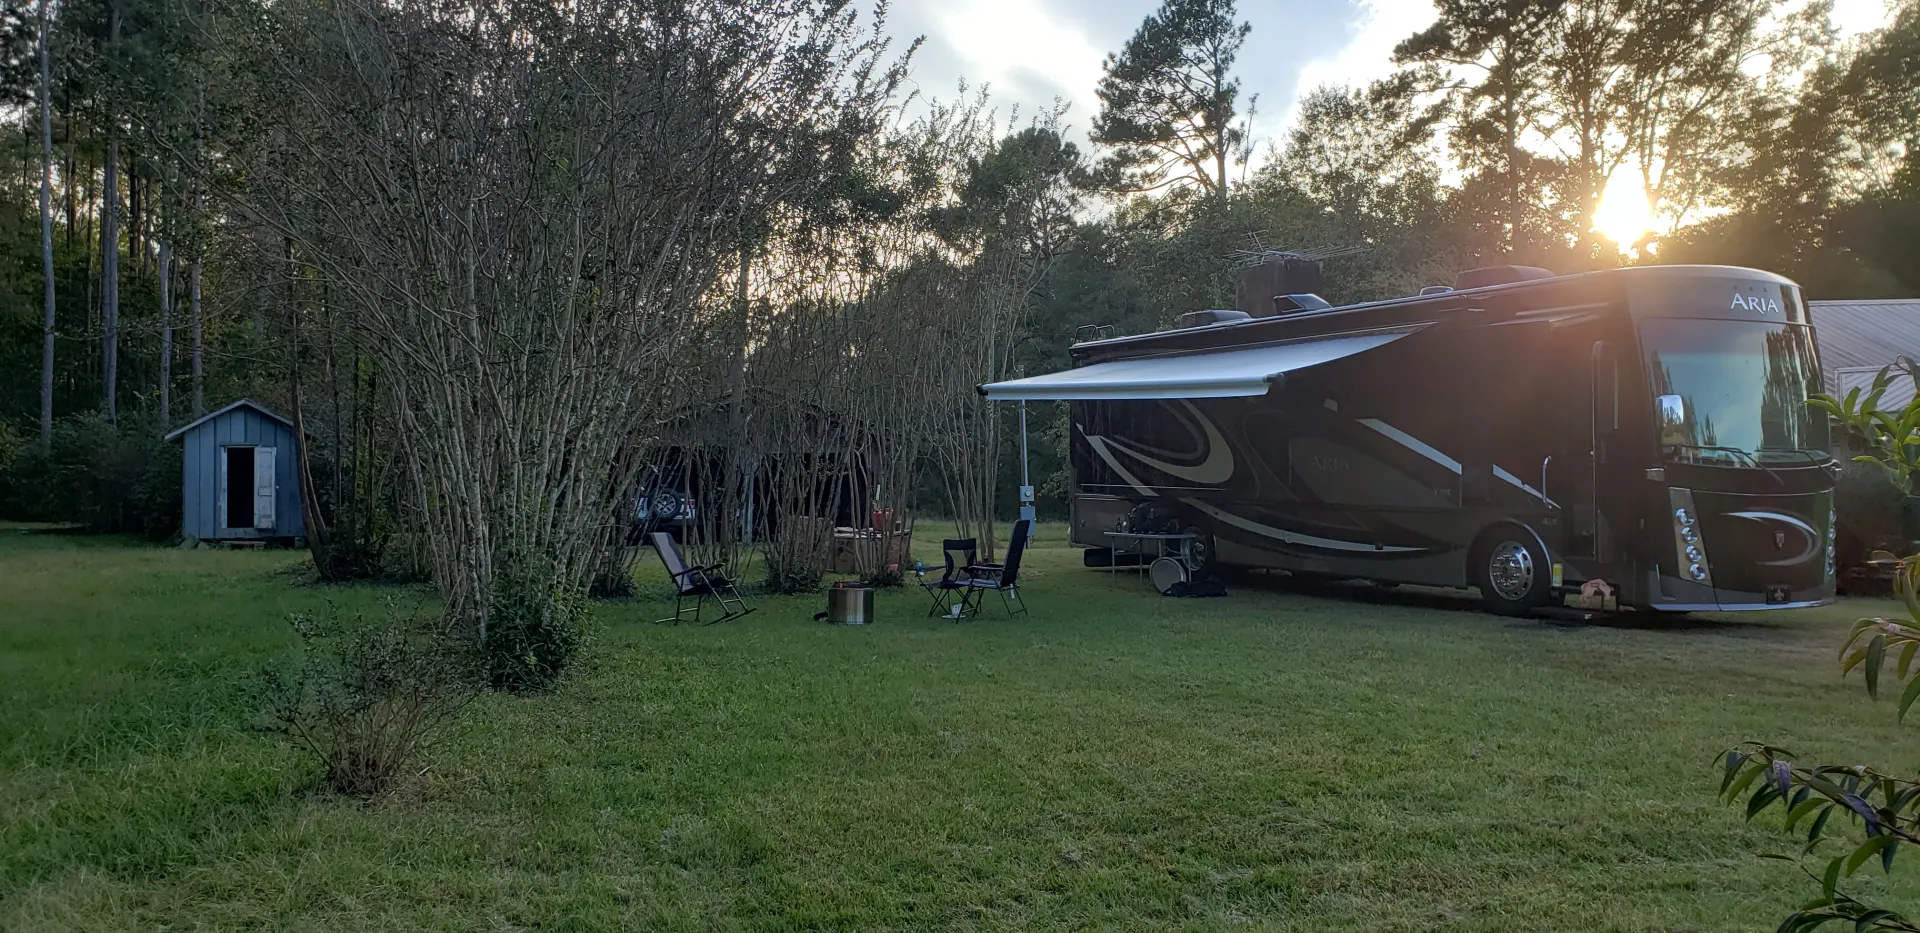 Camper submitted image from 20 private acres in Woodland, GA - 1